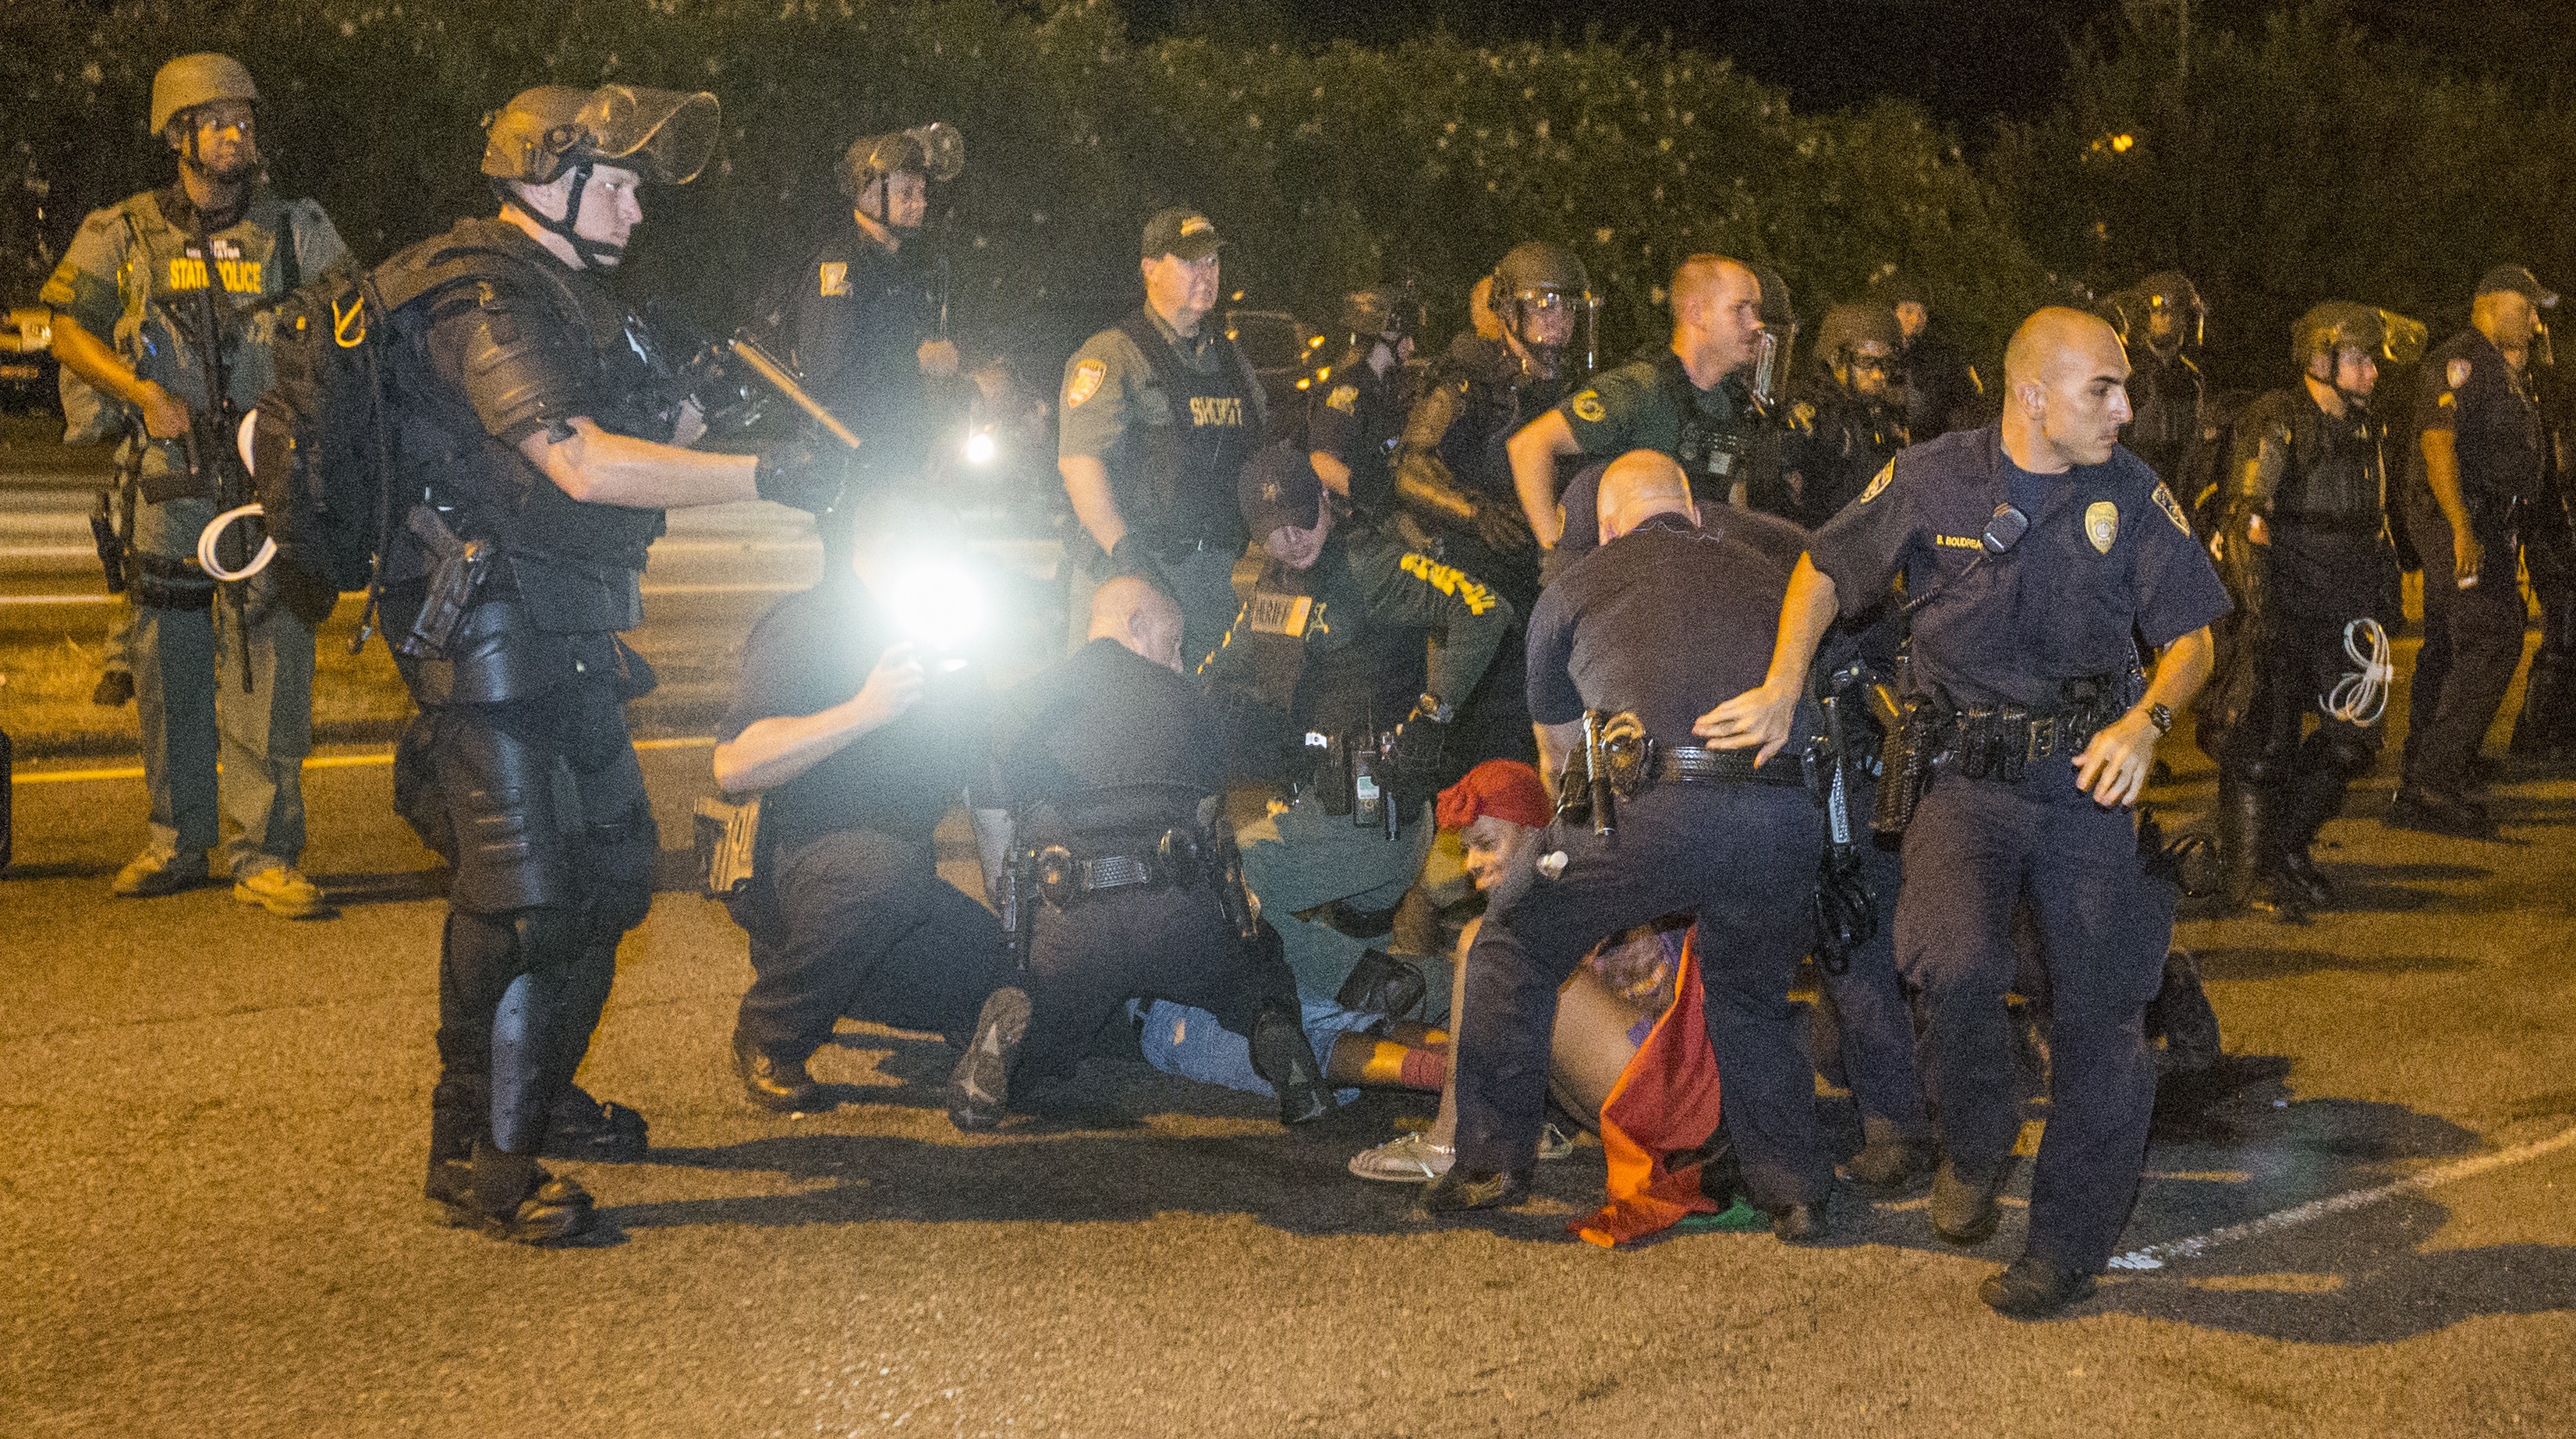 A photo shows police arresting protesters. 